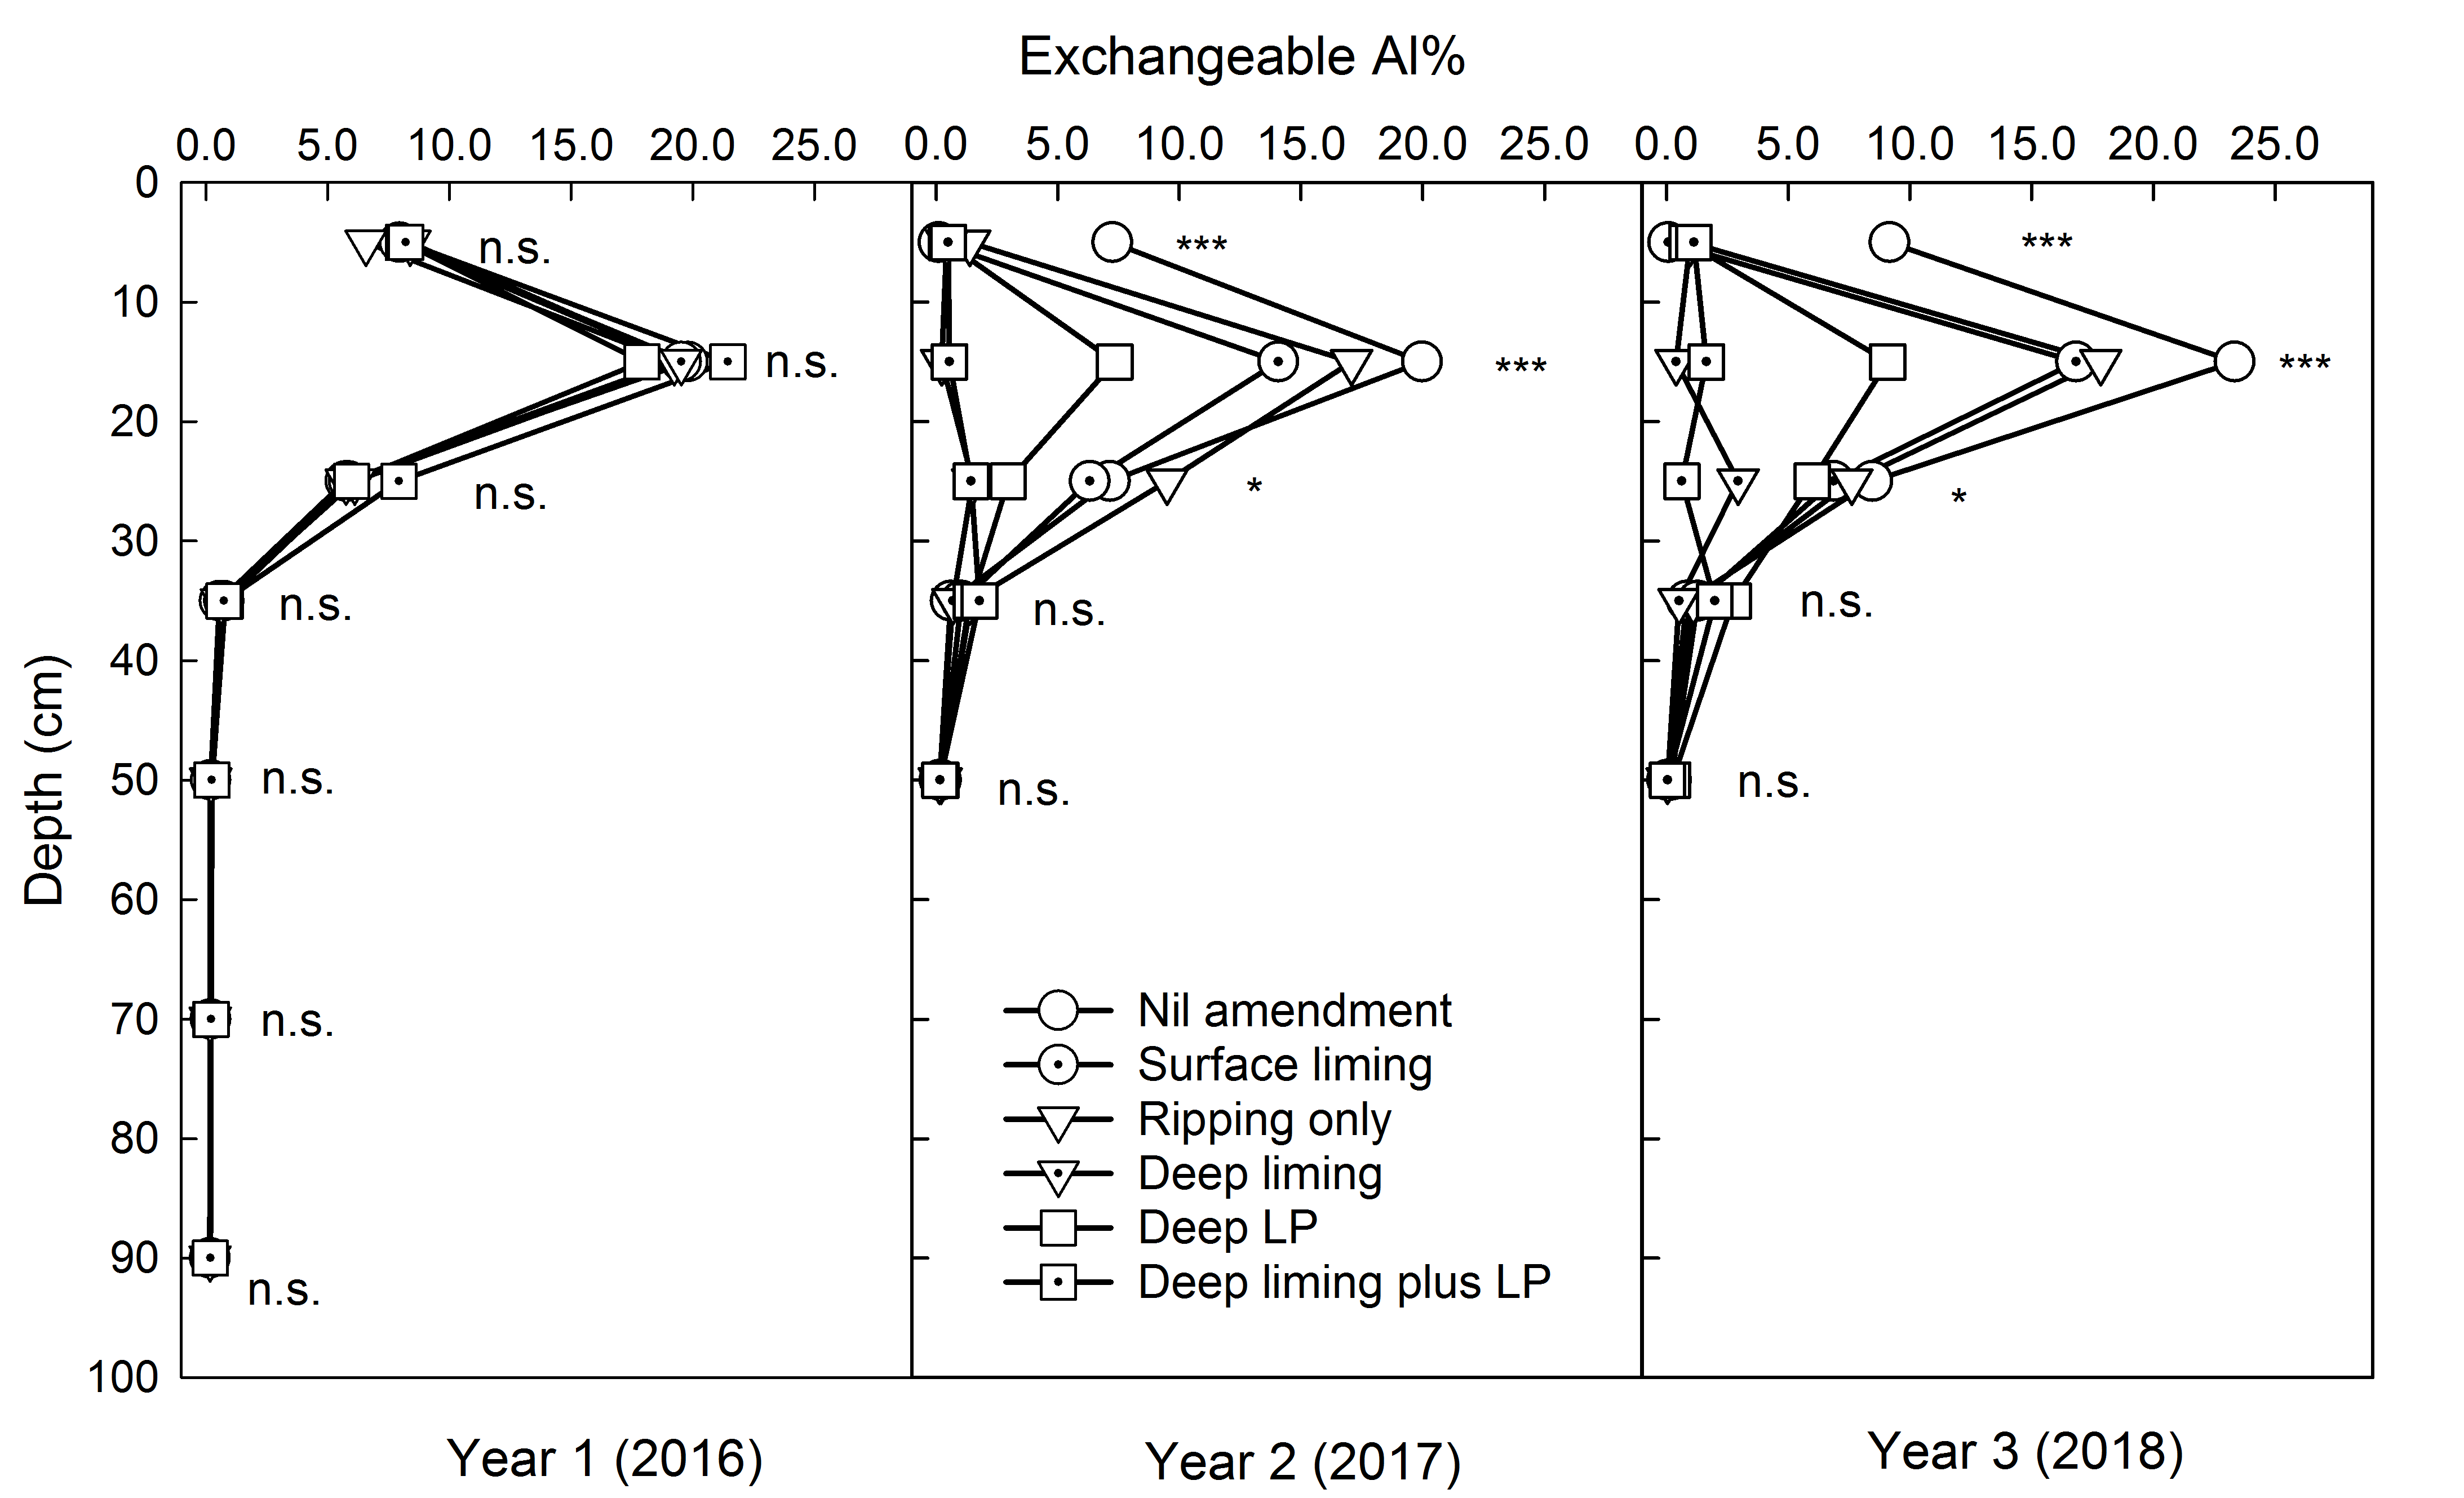 These three line graphs show the soil exchangeable Al% under different soil amendment treatments in autumn in years 1–3 at the Cootamundra site. n.s., not significant.